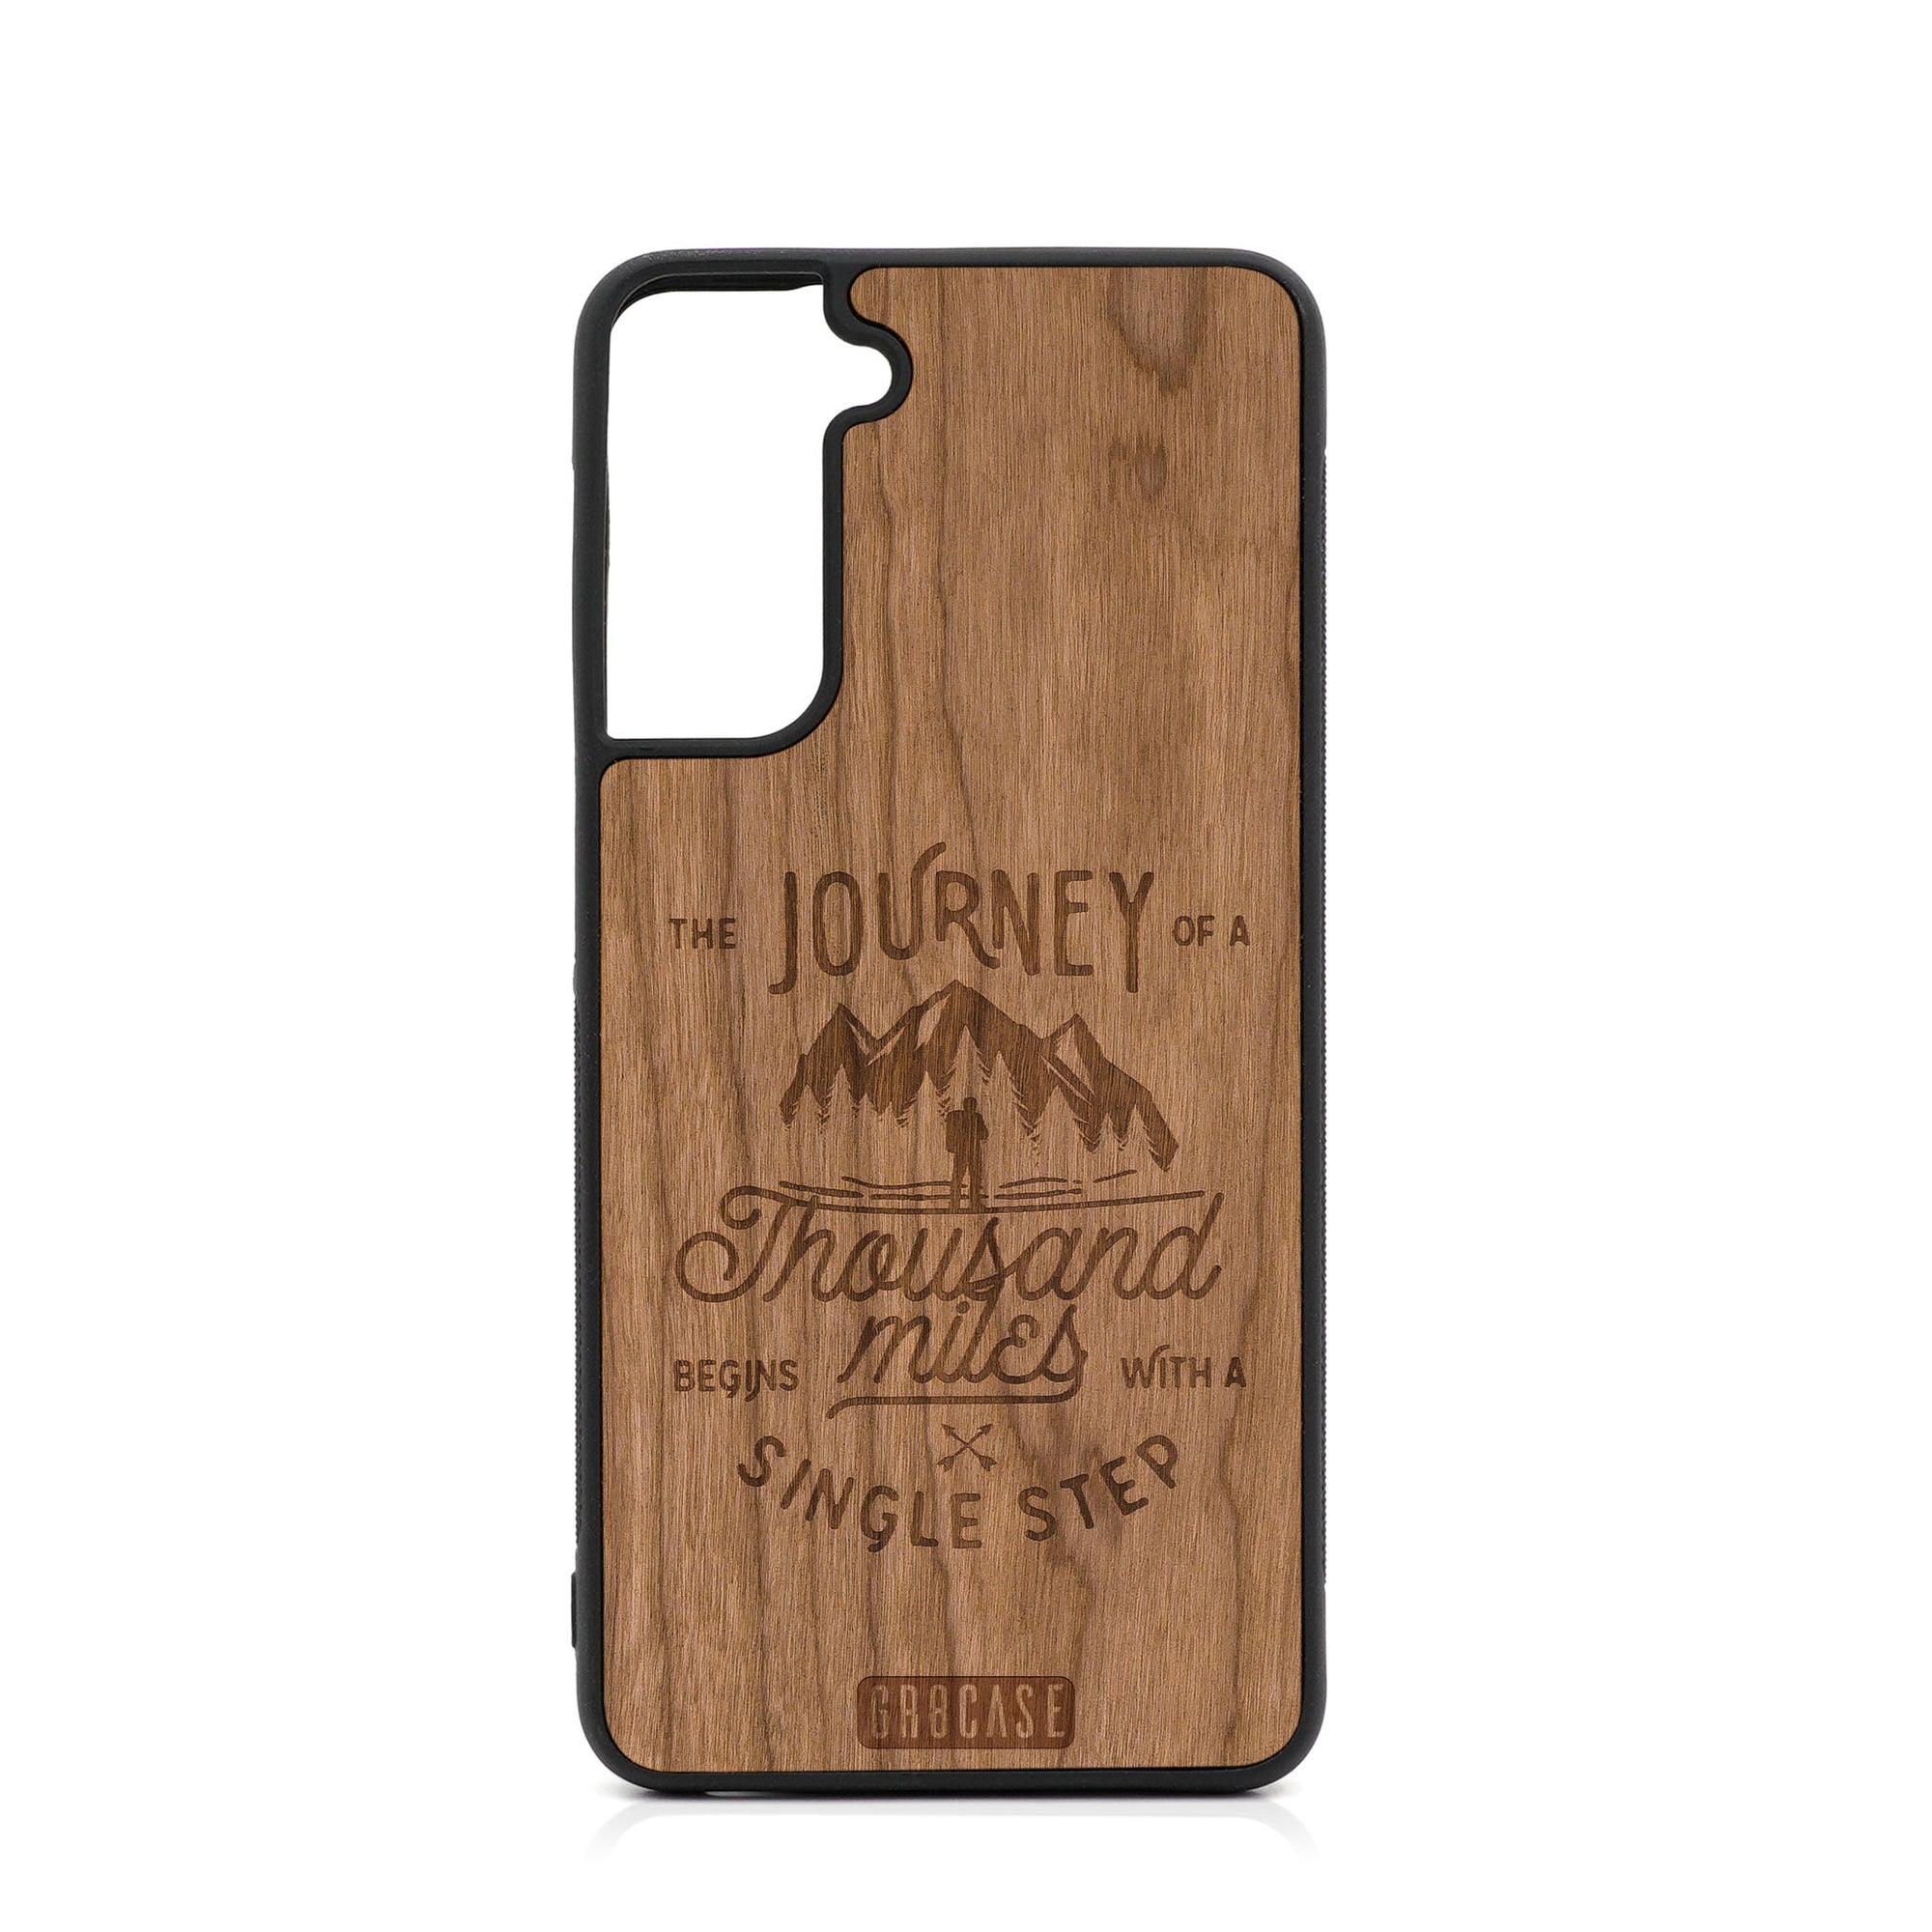 The Journey of A Thousand Miles Begins With A Single Step Design Wood Case For Samsung Galaxy S21 5G